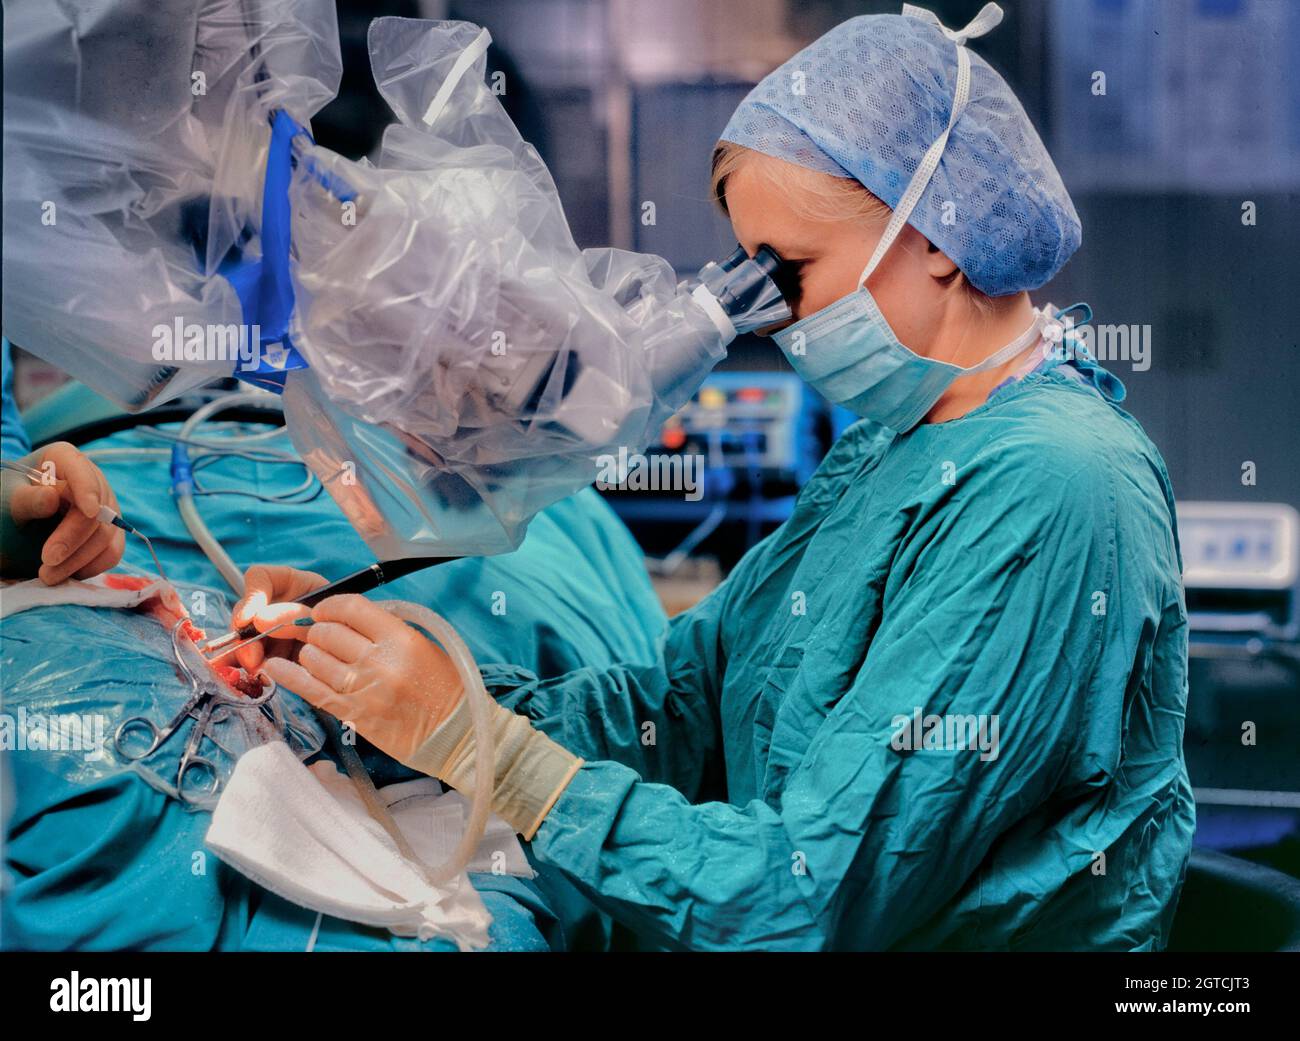 A woman surgeon implanting a cochlear receiver into a patient. Stock Photo